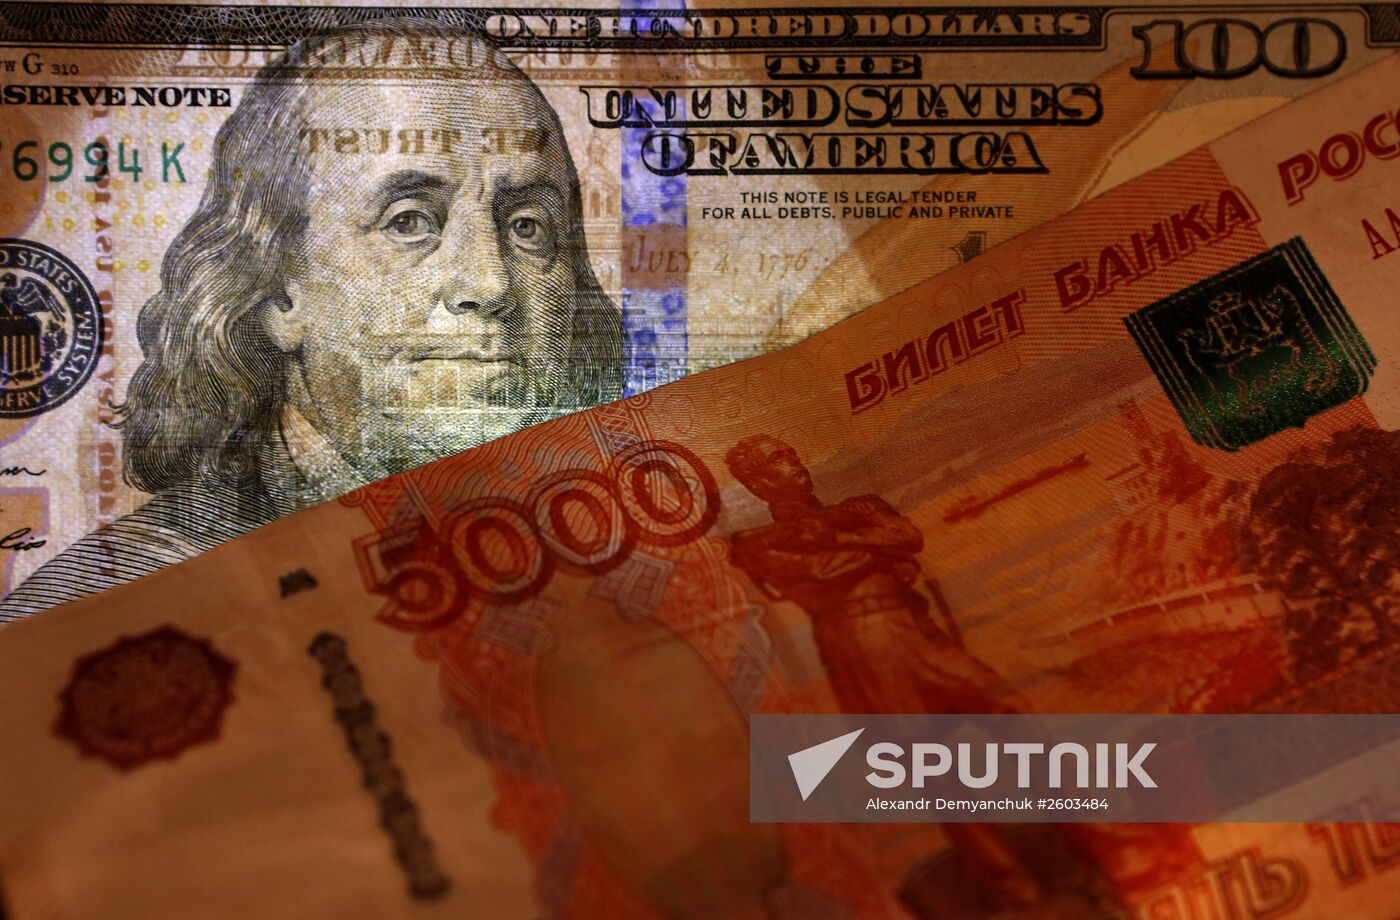 US and Russian banknotes